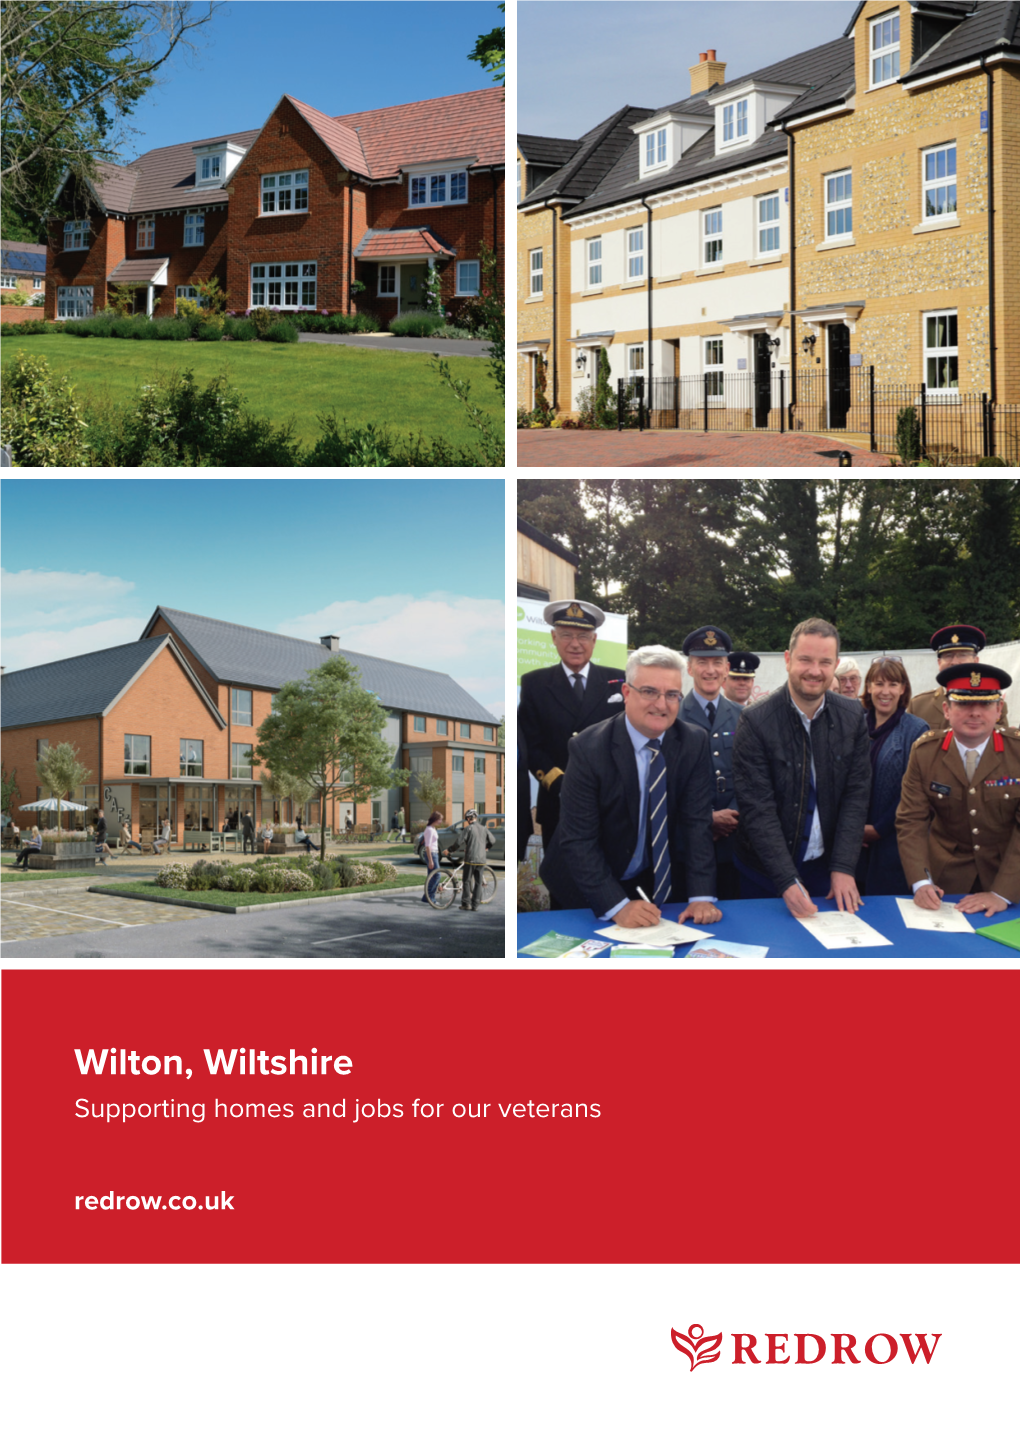 Wilton, Wiltshire Supporting Homes and Jobs for Our Veterans Redrow.Co.Uk in Summary